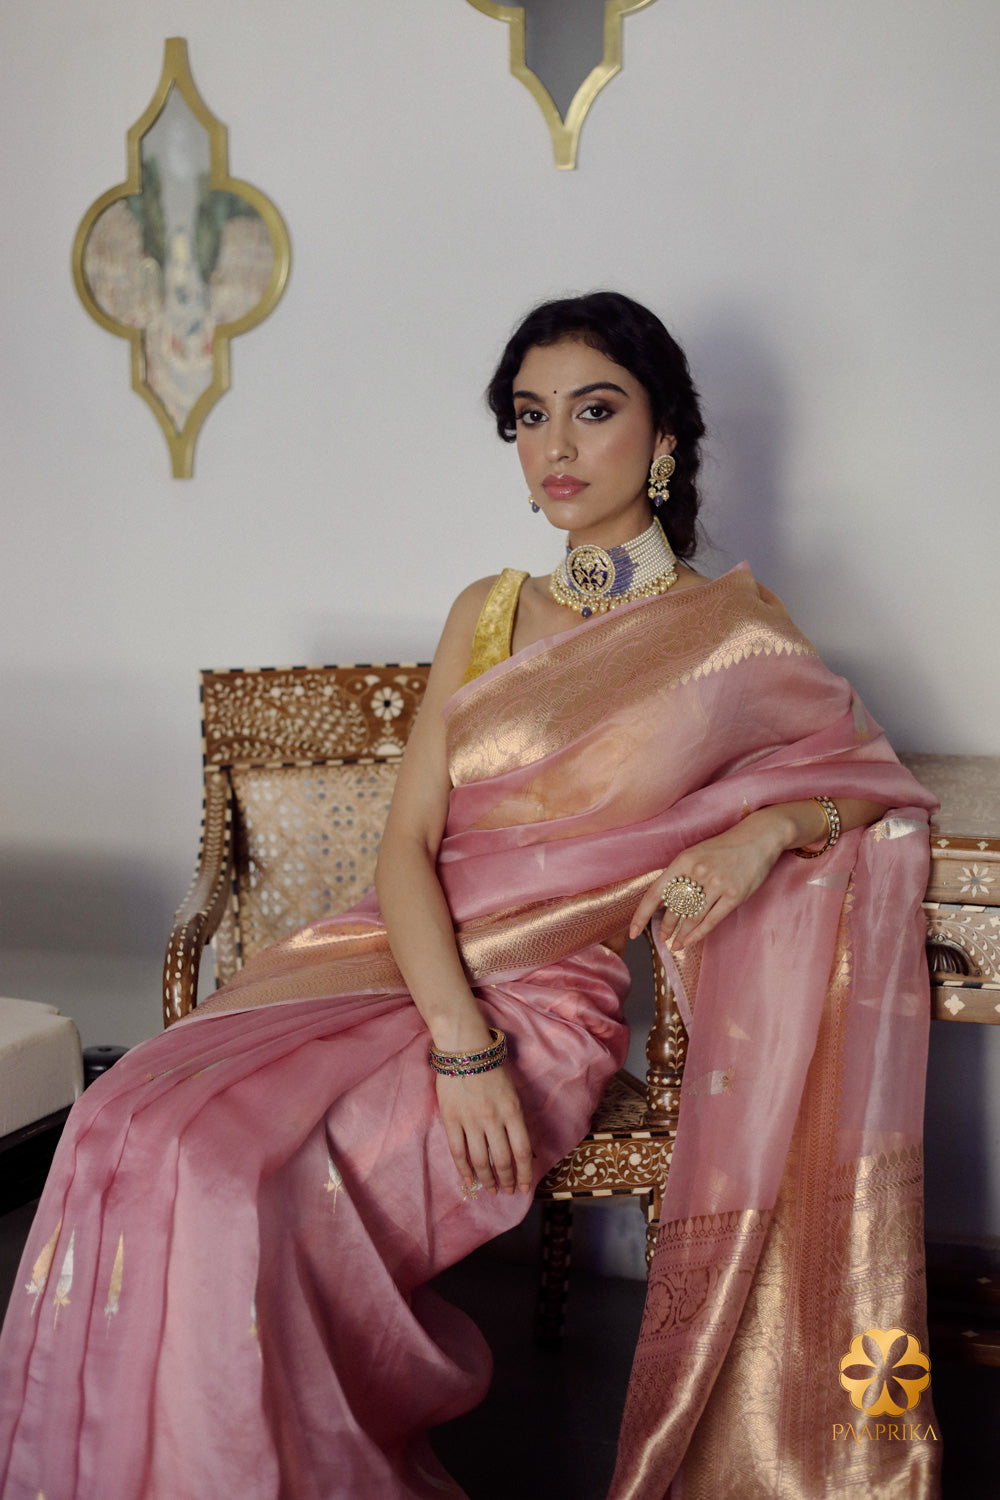 Pastel Onion Pink Banarasi Organza Saree paired with complementary accessories. The saree's delicate pastel hue and intricate handwoven pattern create a stunning ensemble, harmoniously complemented by the accessories for a complete and elegant appearance.